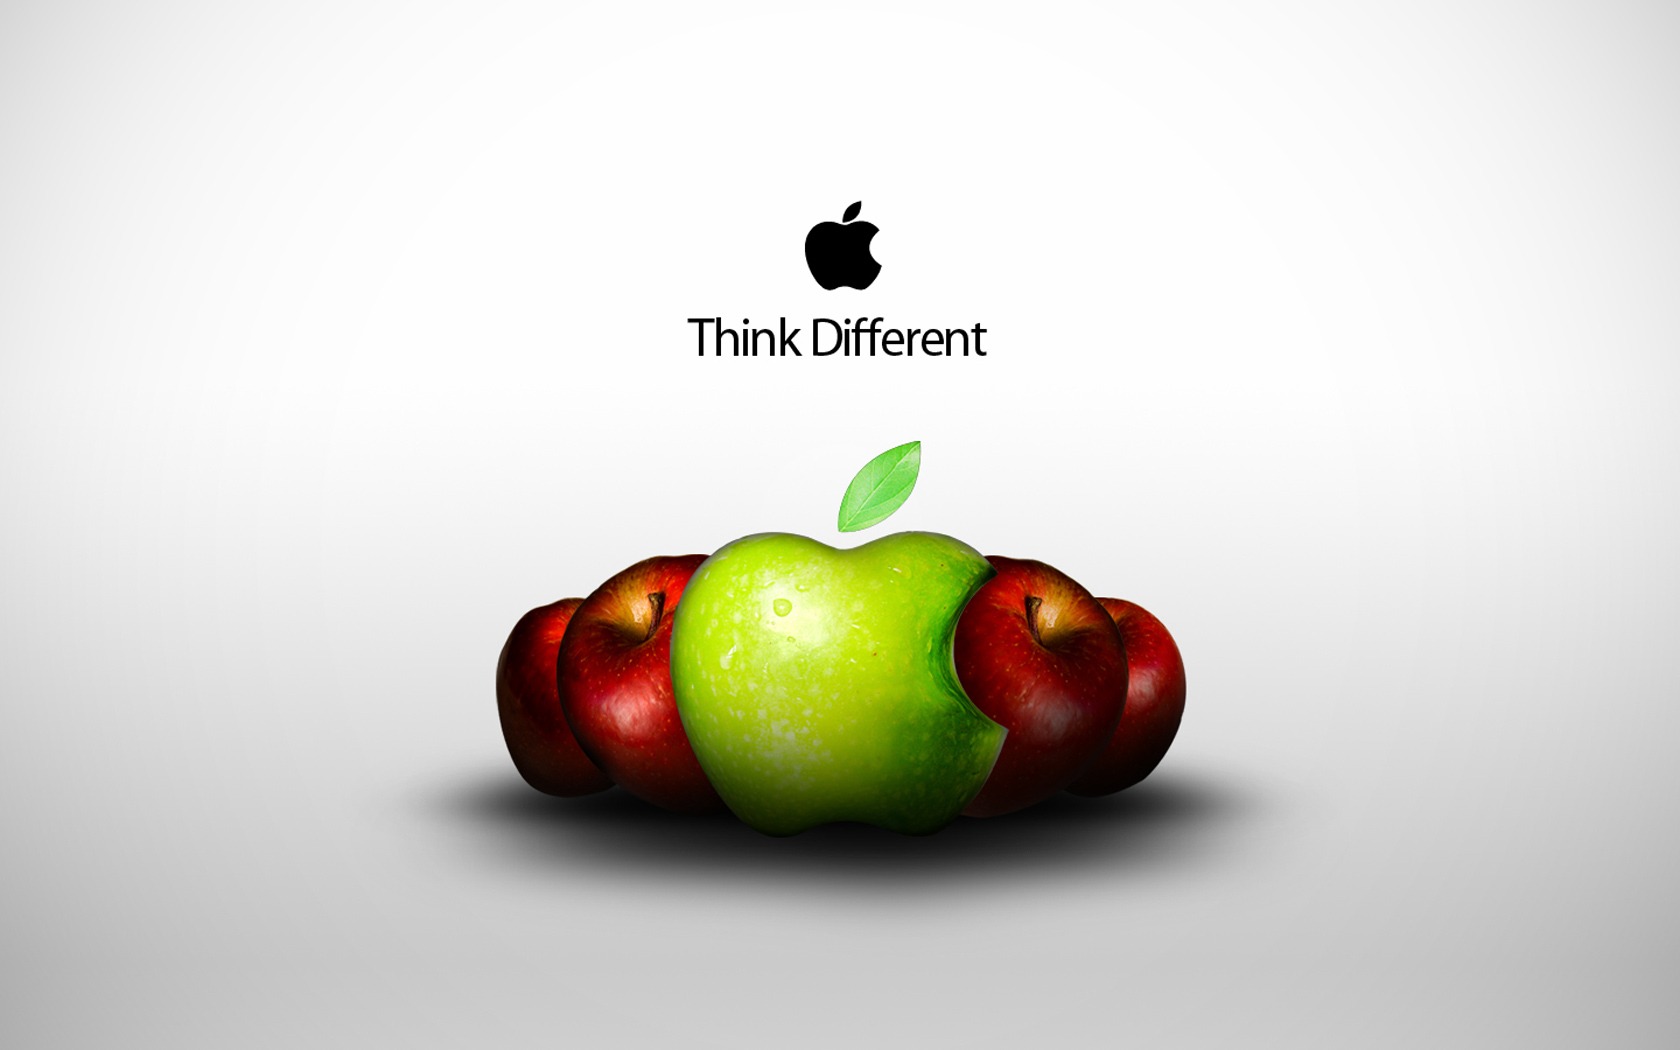 We Are Different Ad - 1680x1050 Wallpaper 